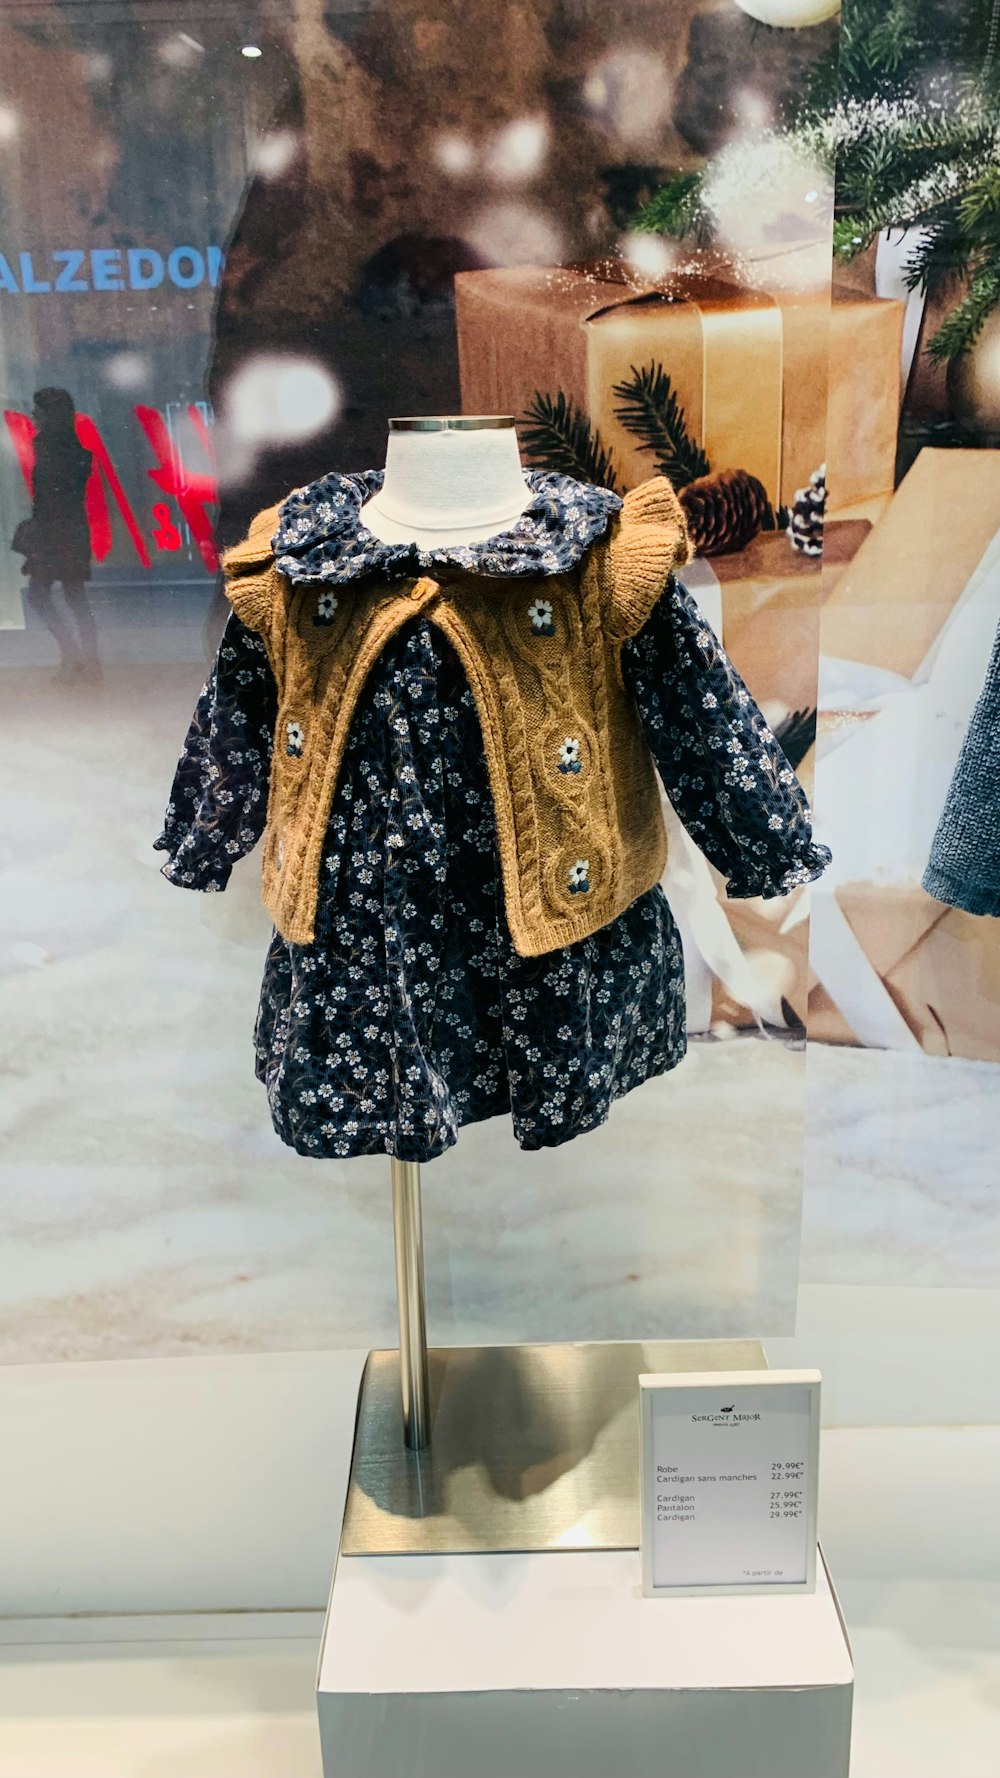 a dress and jacket on display in a glass case